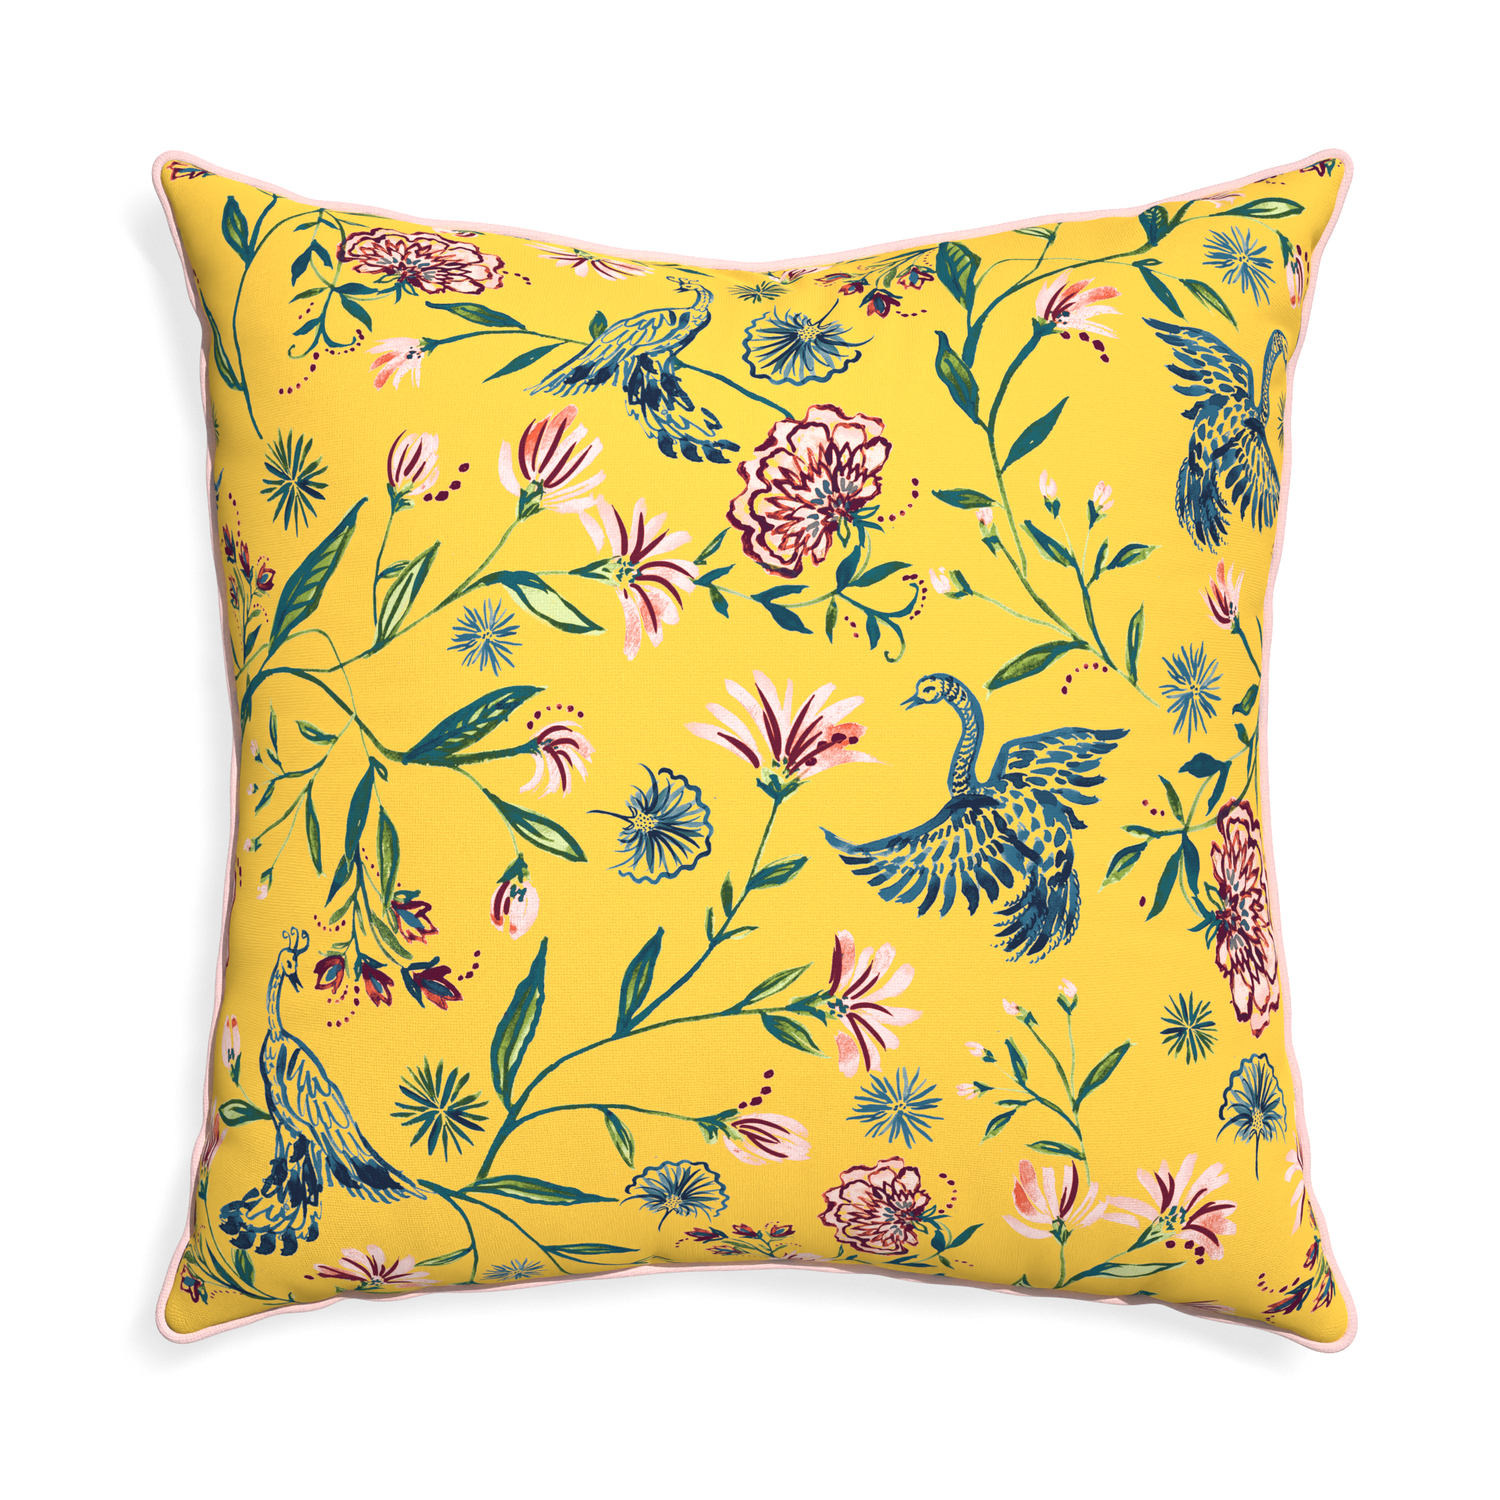 Euro-sham daphne canary custom pillow with petal piping on white background